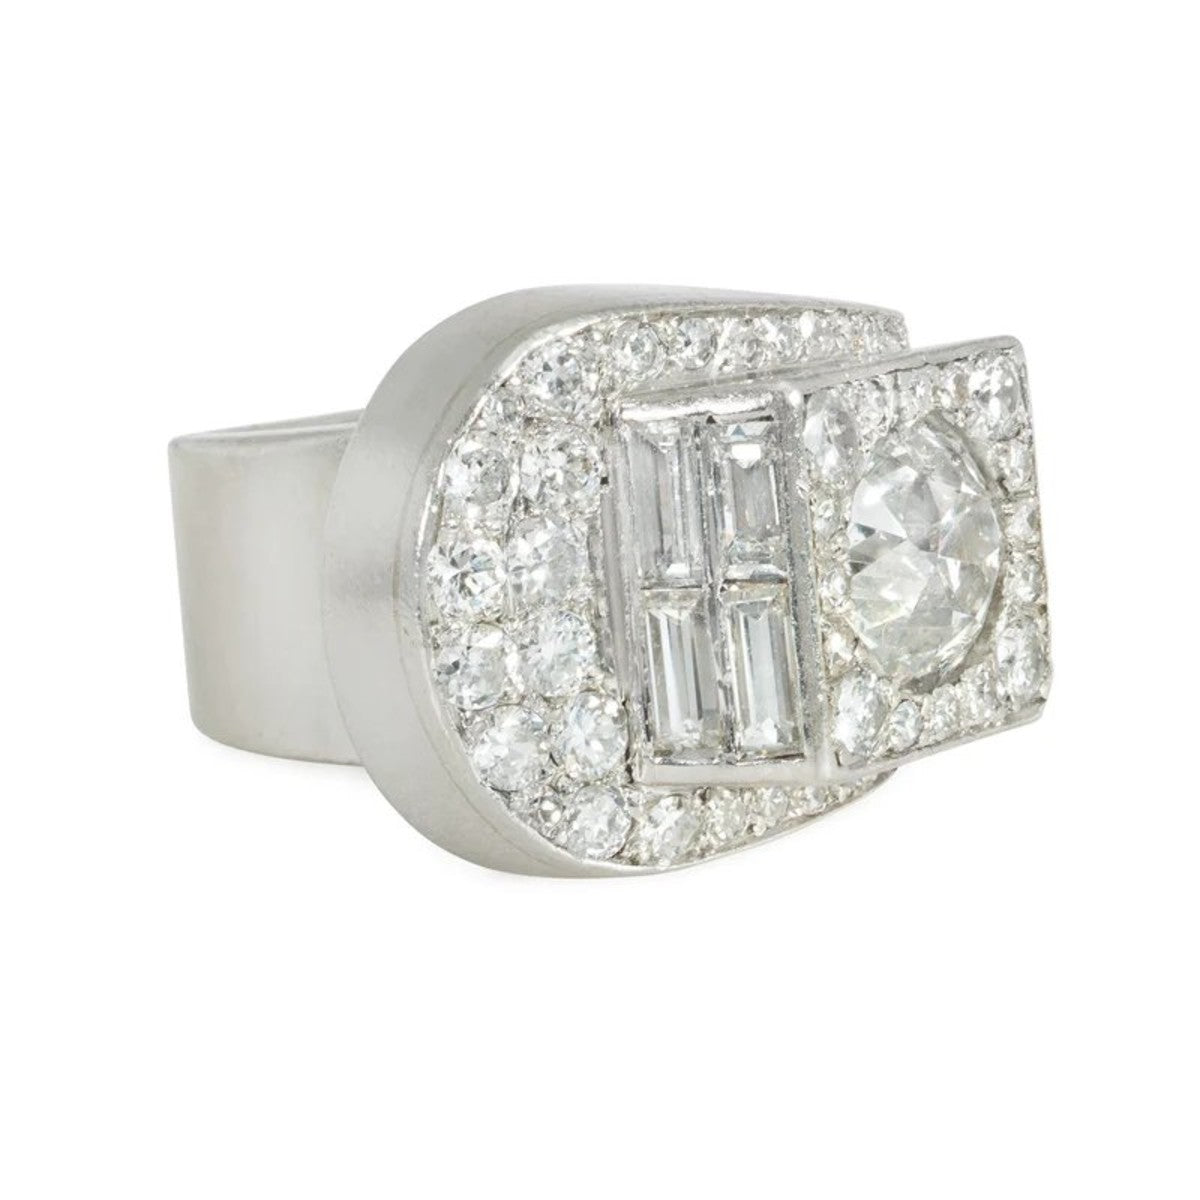 French Art Deco Platinum Diamond Stylized Buckle Ring front side